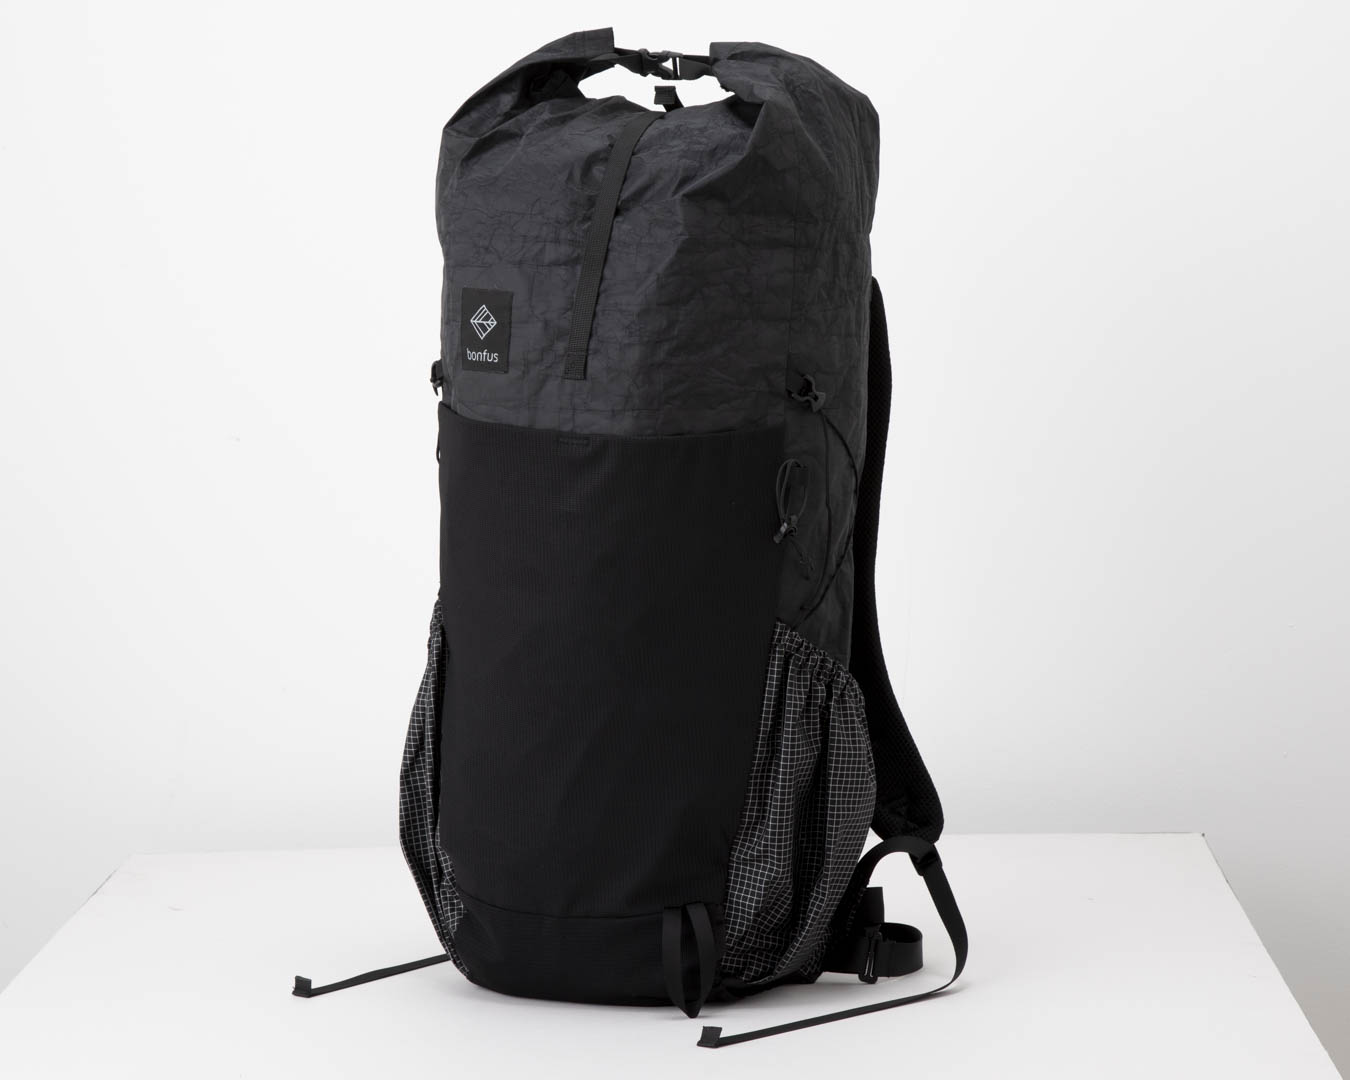 THE BACKPACK TEST 2023現行ULバックパック10種類を背負ってみた（後編